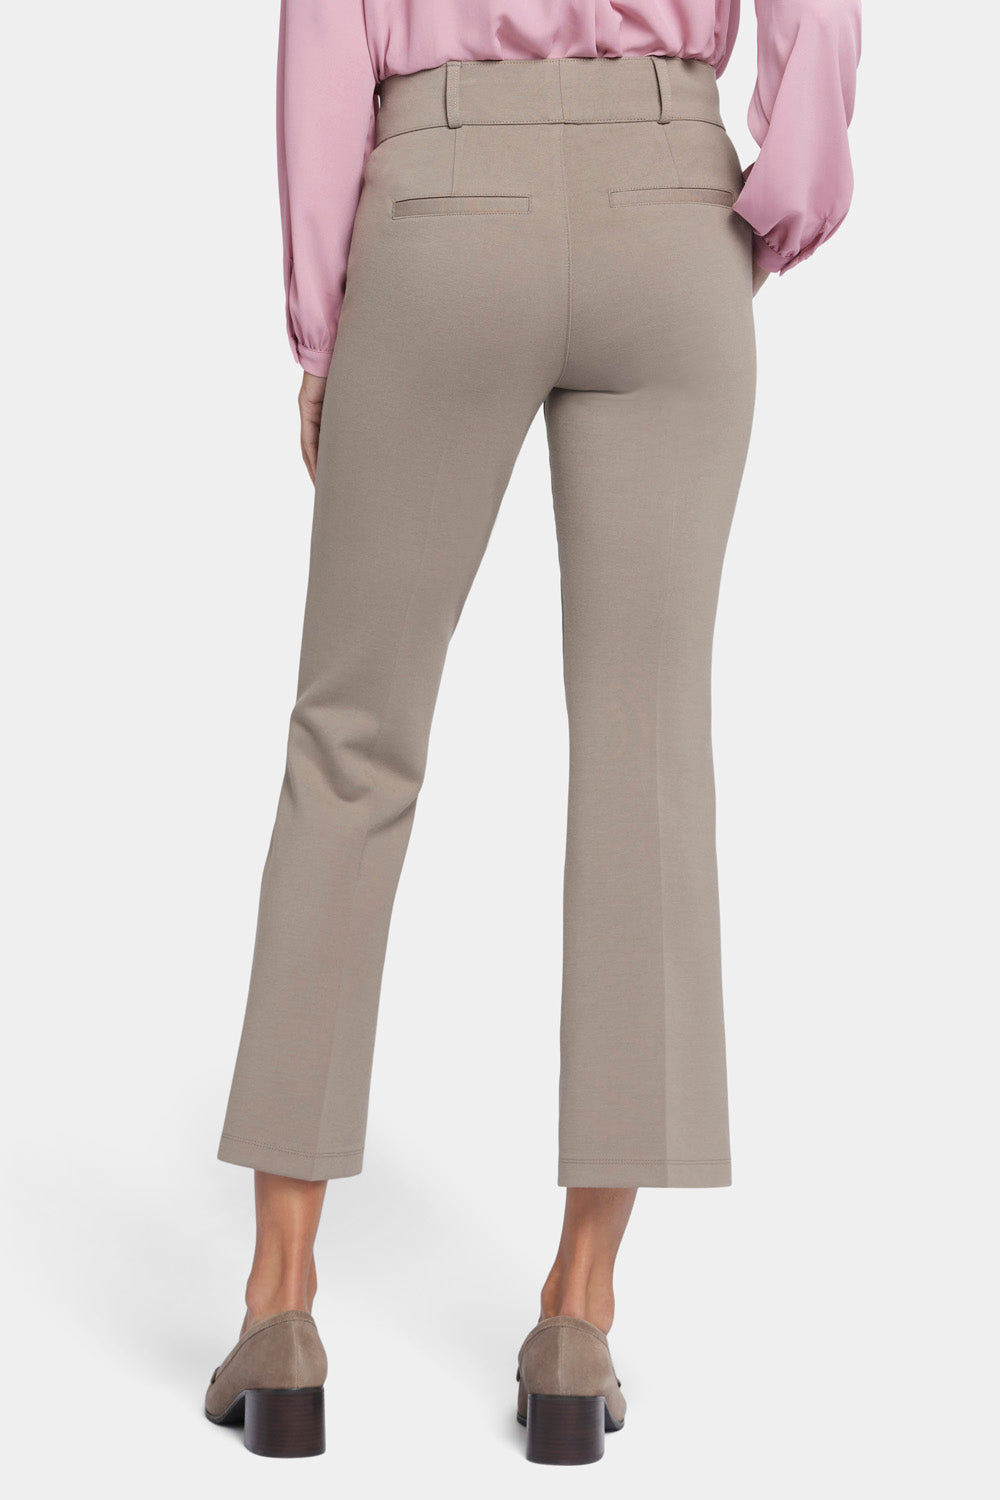 Pull-On Flared Ankle Trouser Pants Sculpt-Her™ Collection - Saddlewood Tan